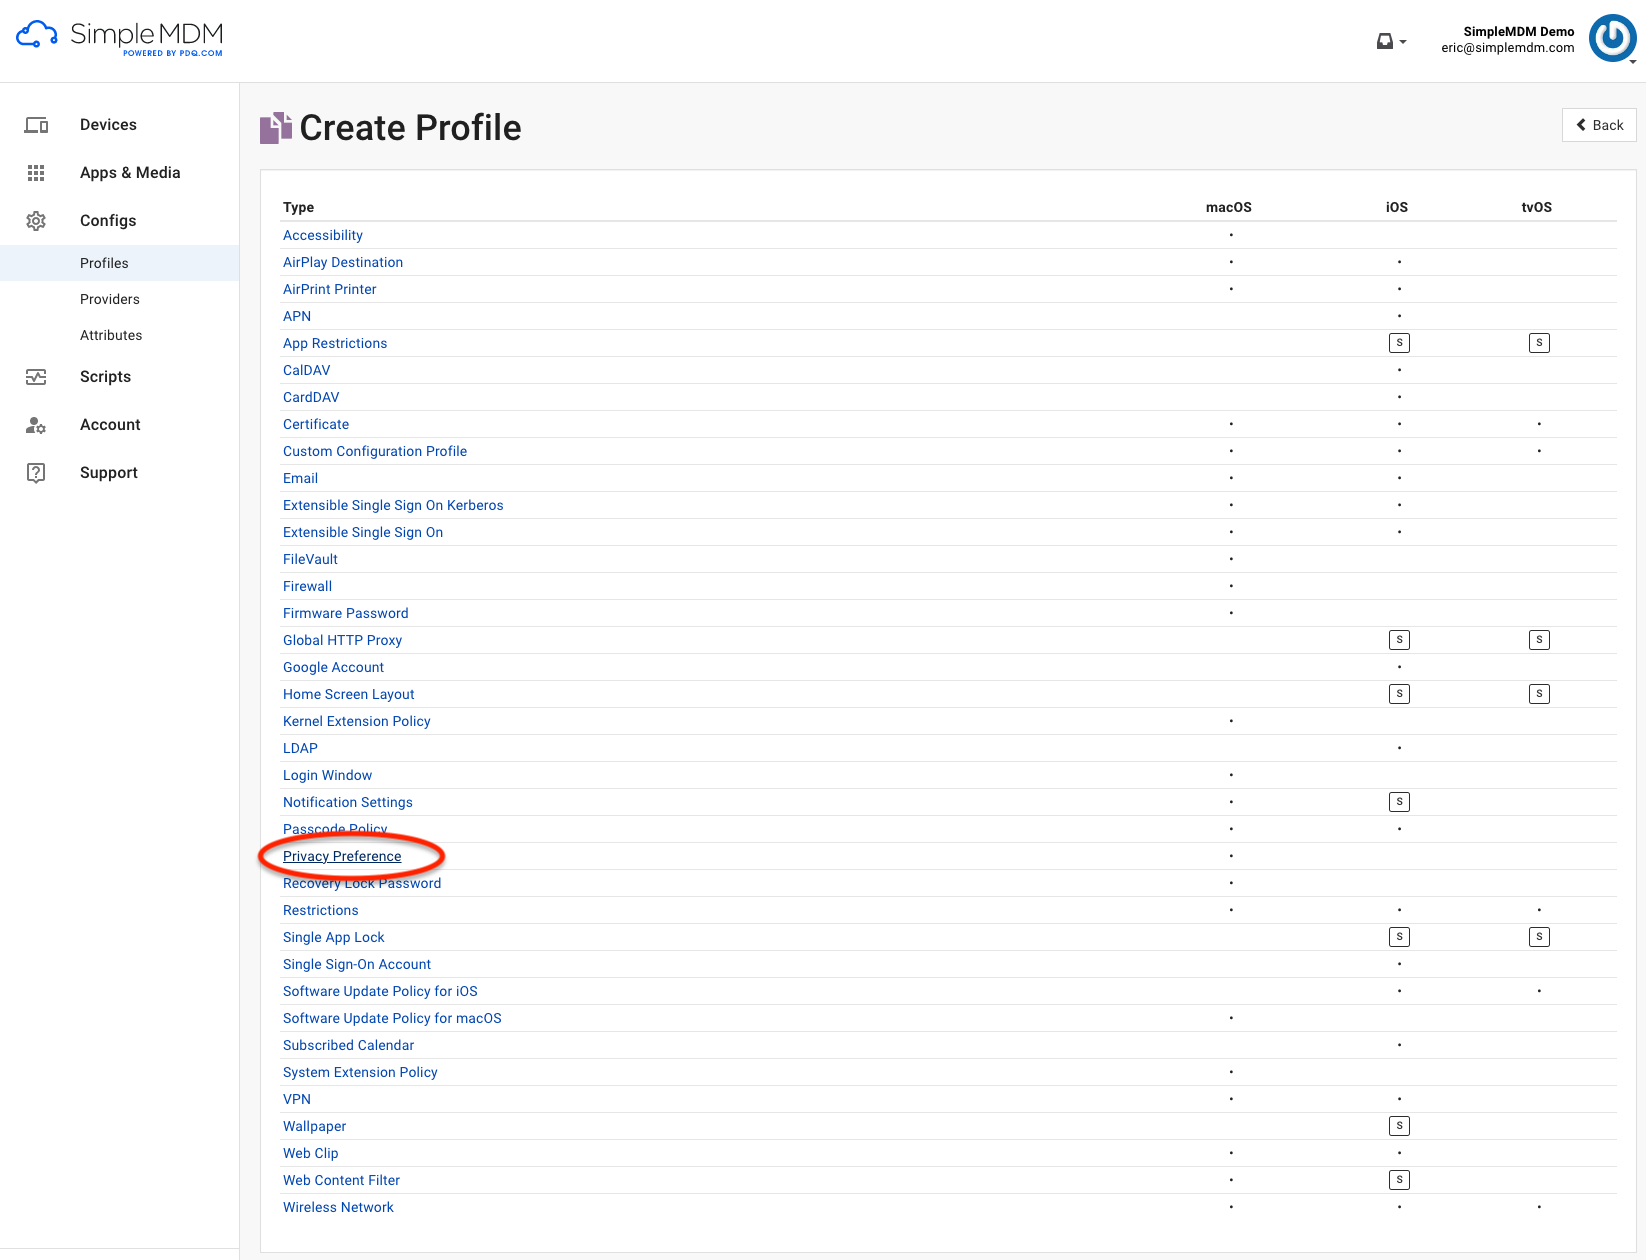 Image of the "Privacy Preference" link on the "Create Profile" menu in SimpleMDM